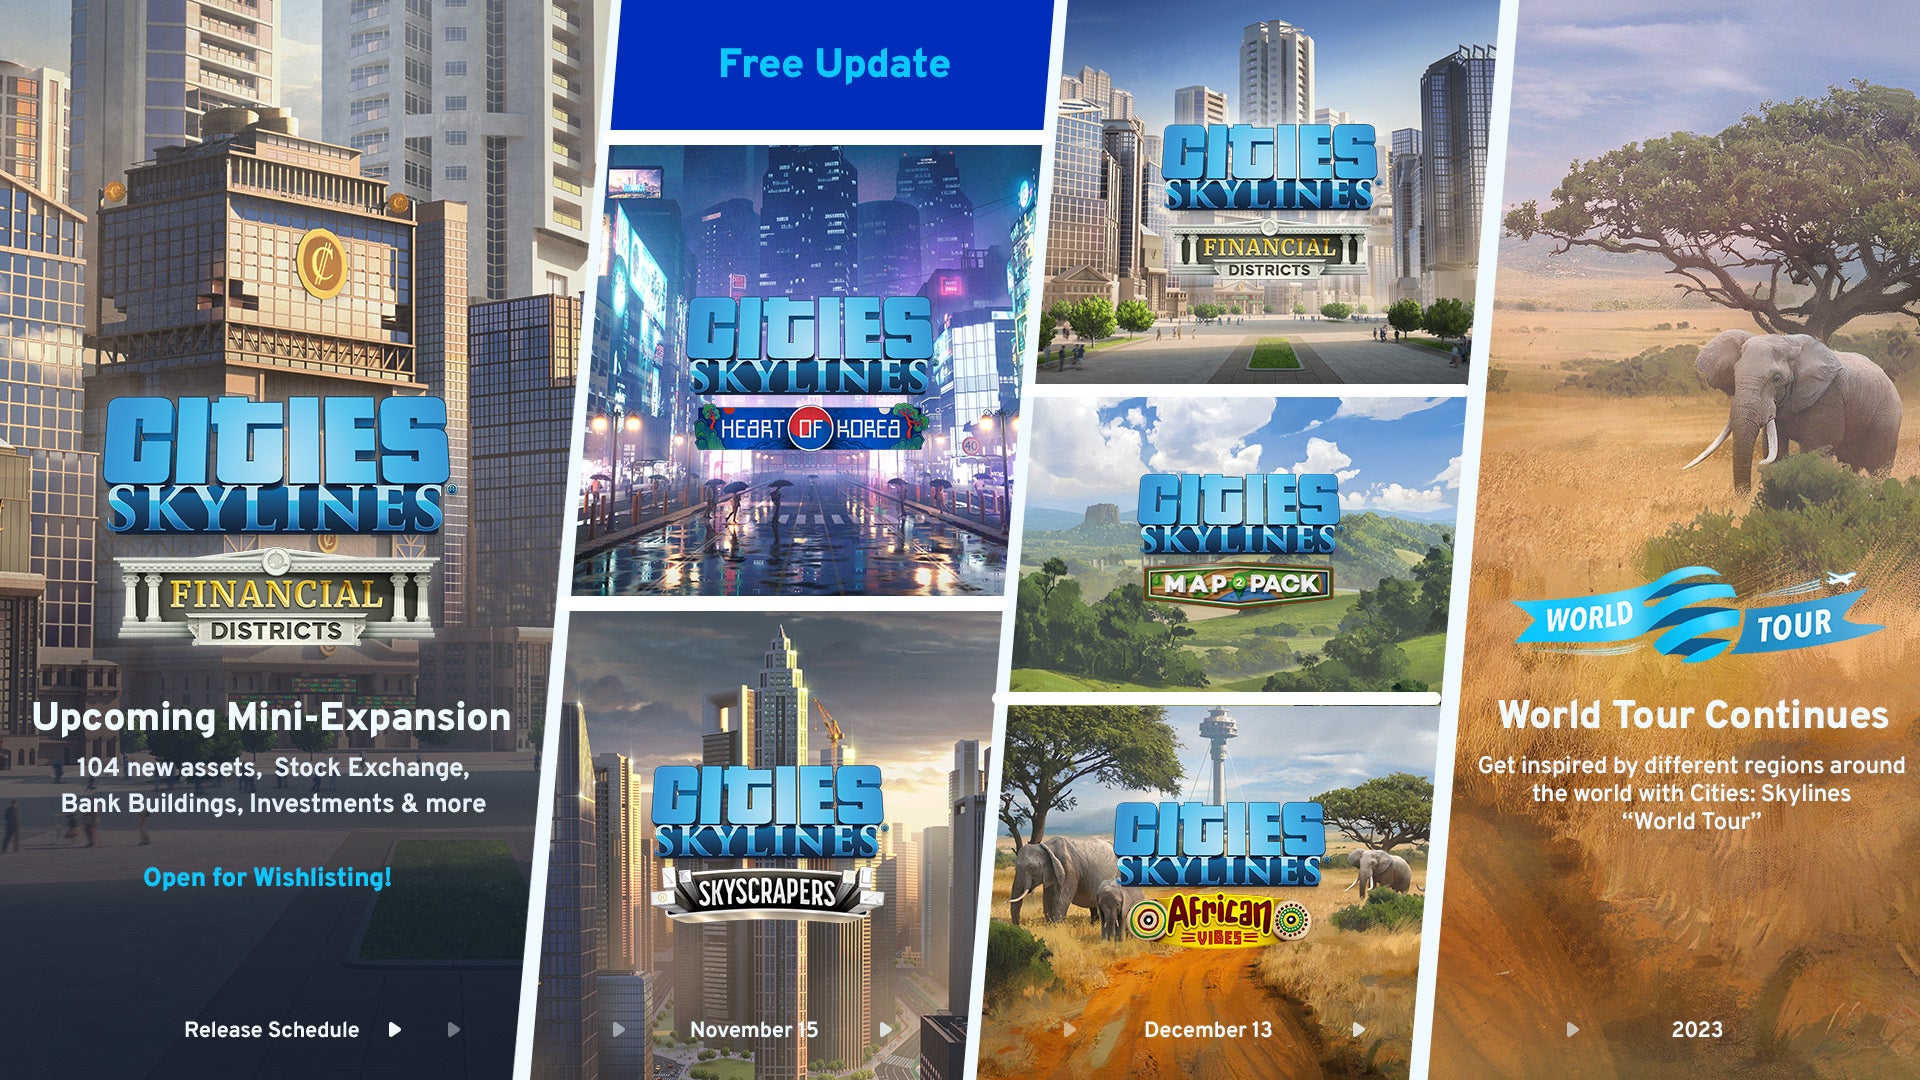 A release schedule for Cities: Skylines World Tour updates.